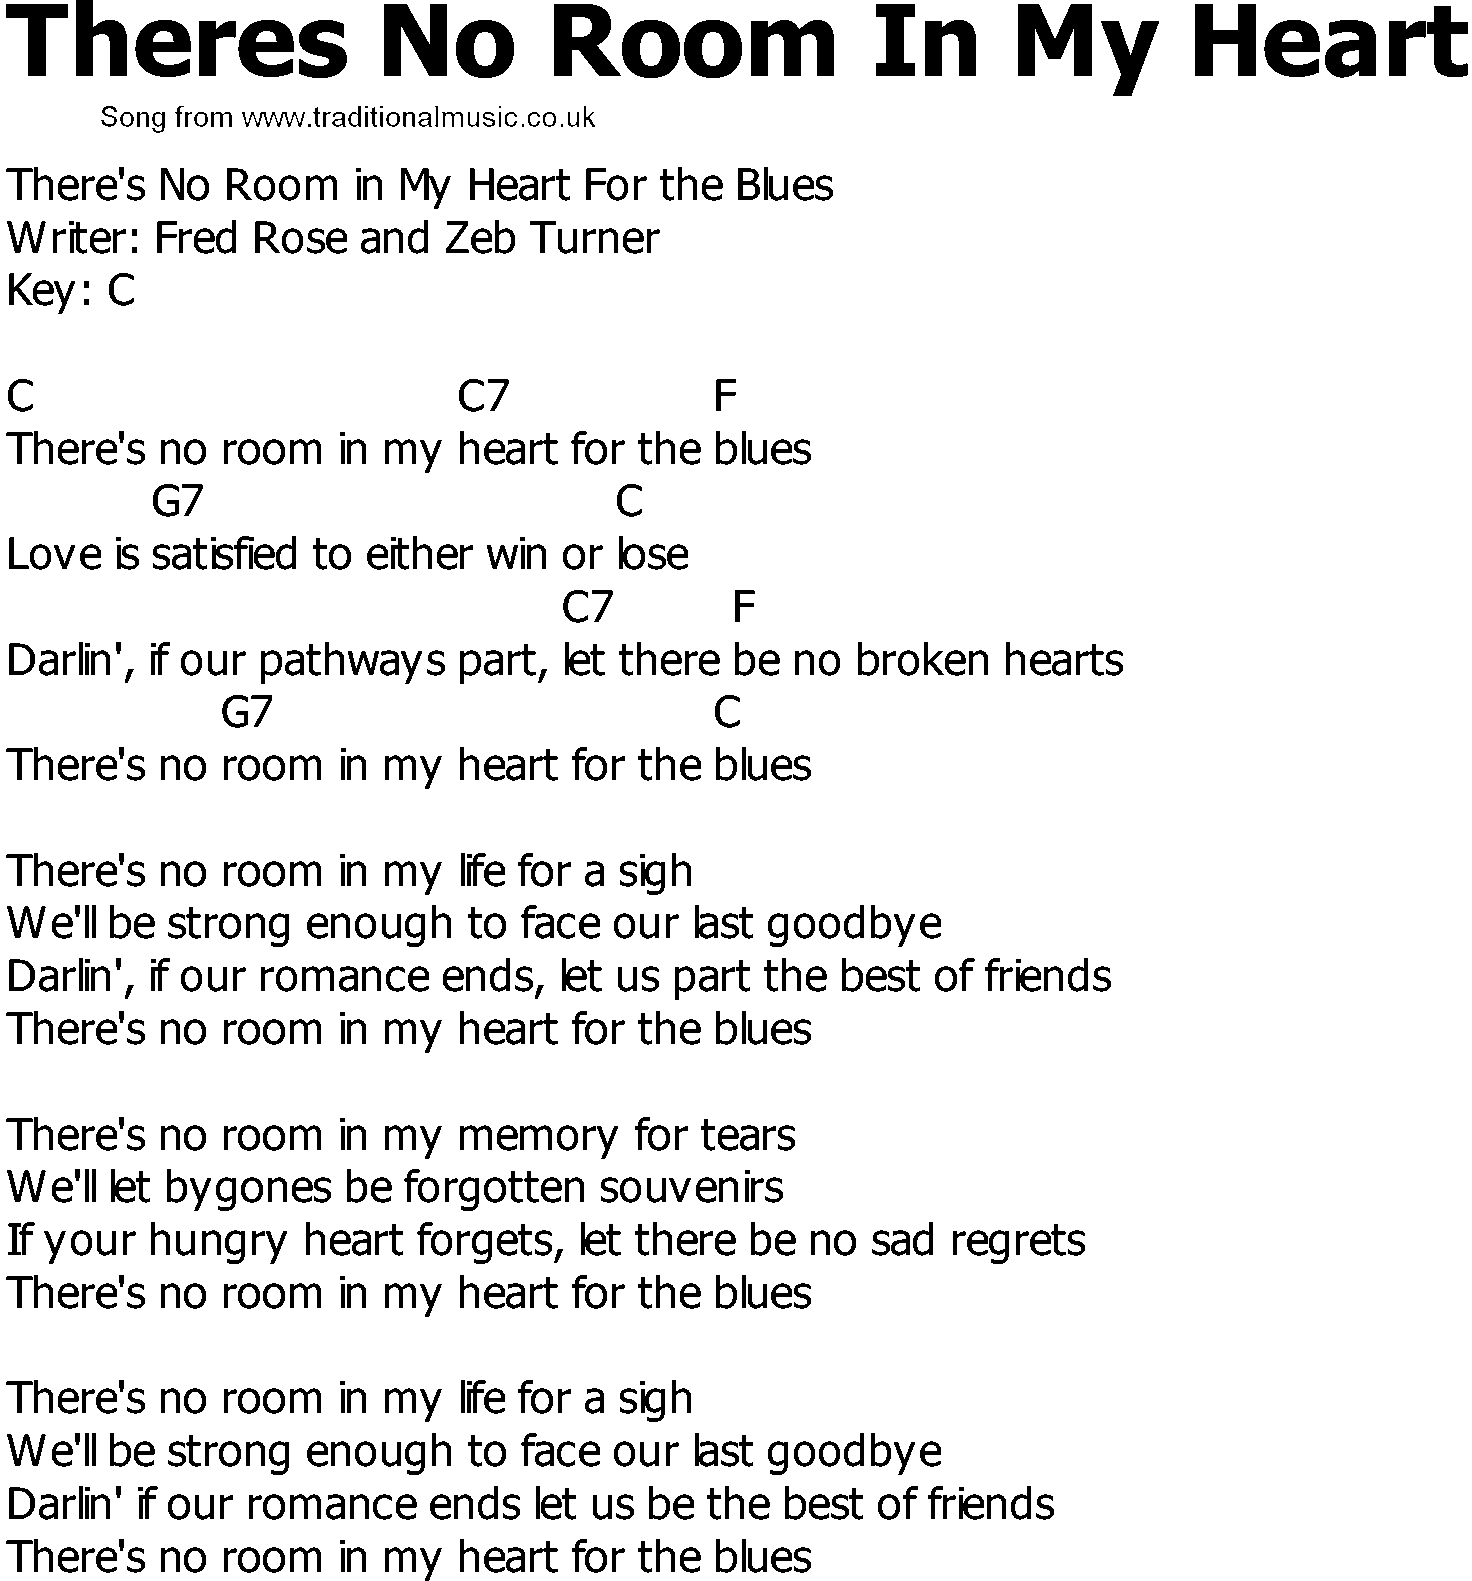 Old Country song lyrics with chords - Theres No Room In My Heart